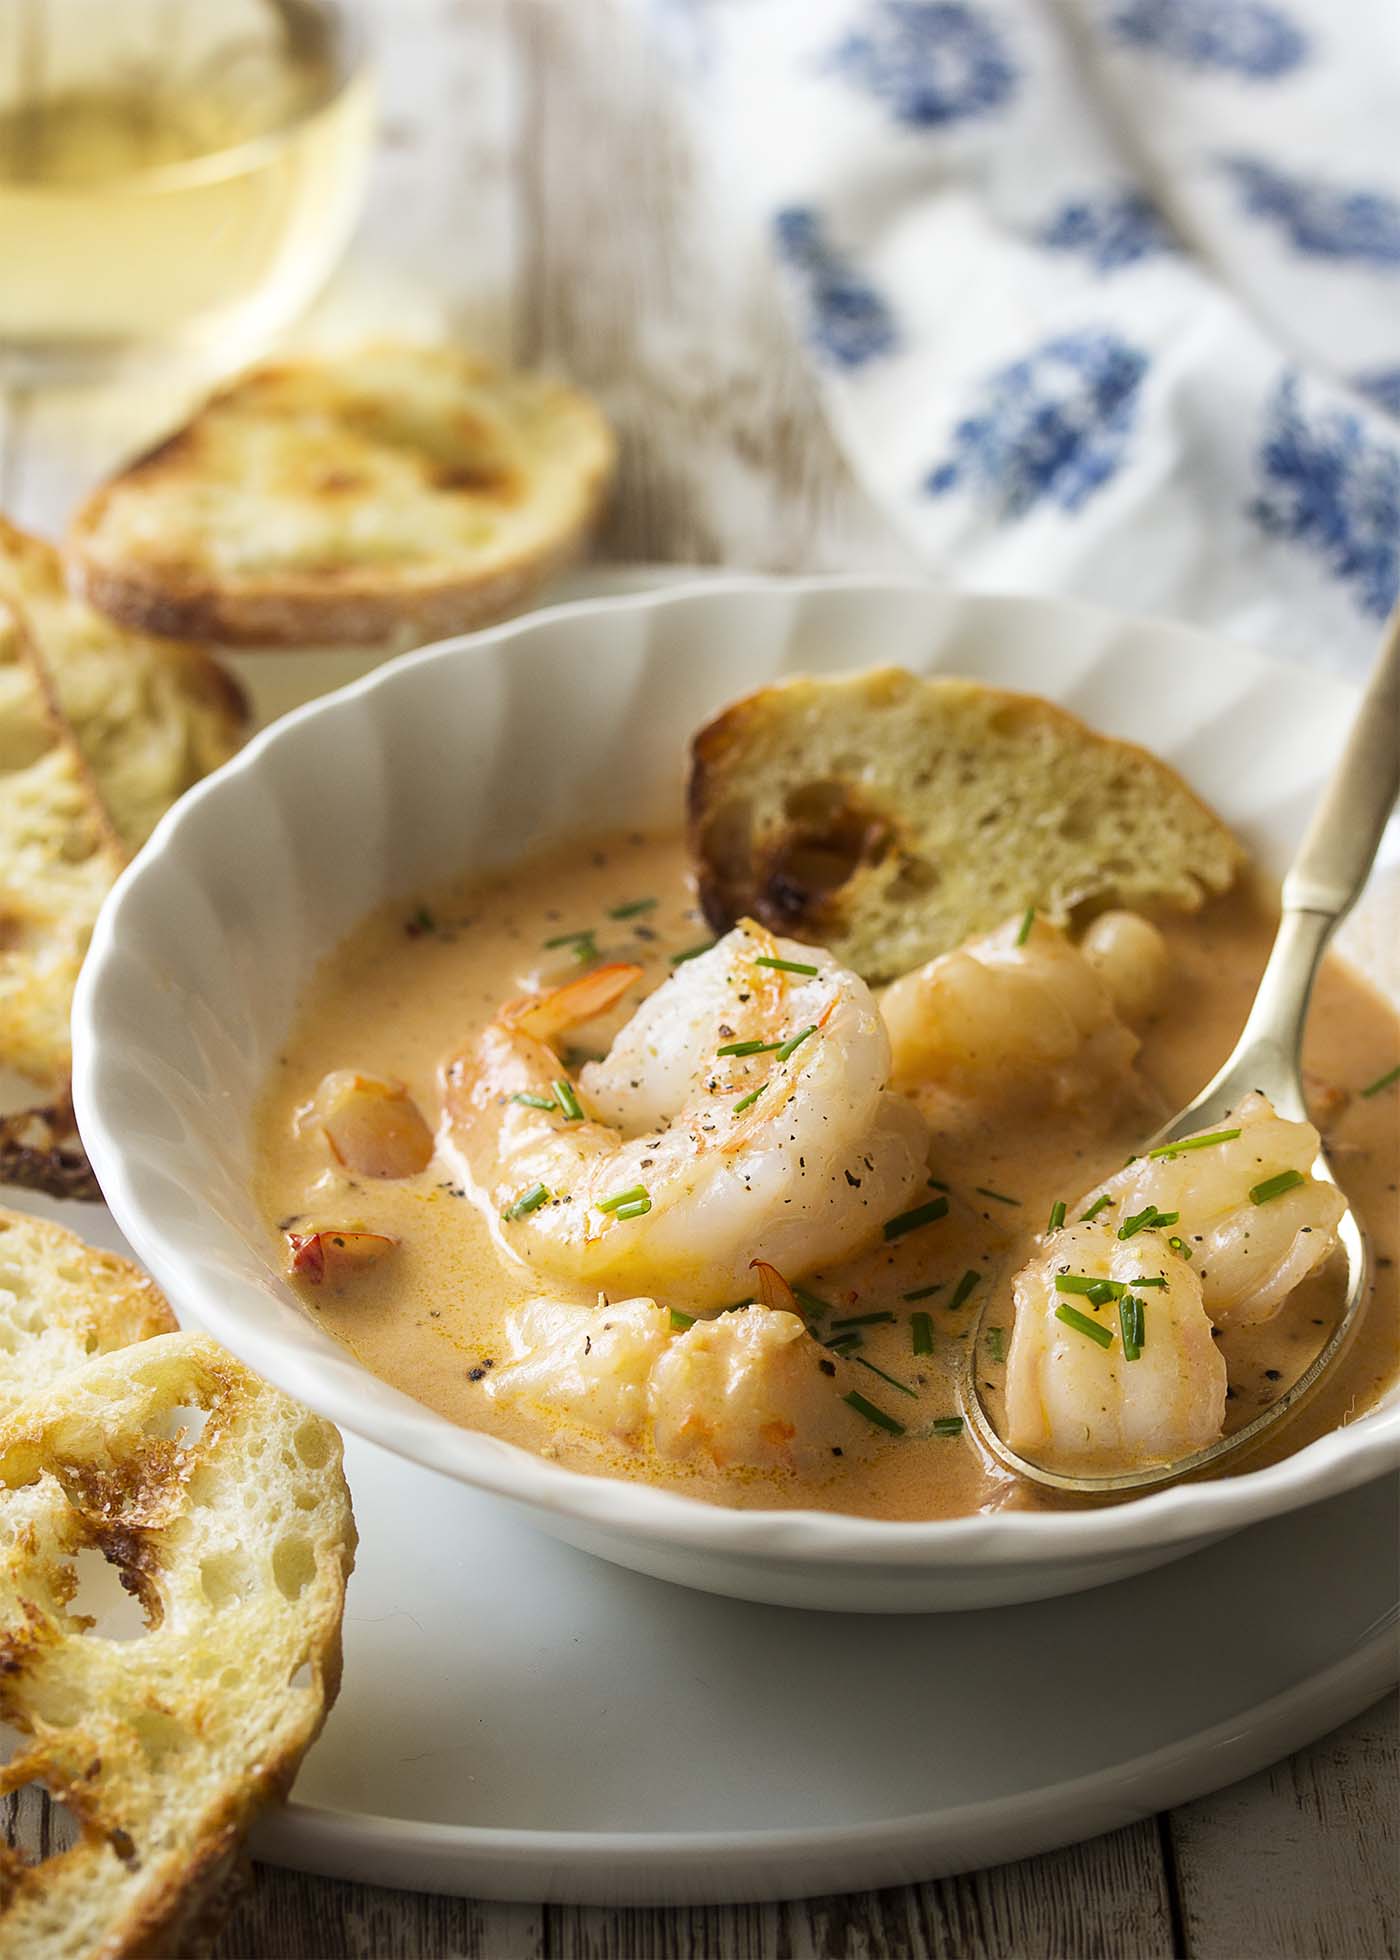 Creamy soup in a white bowl on a plate. Pieces of shrimp in the spoon.